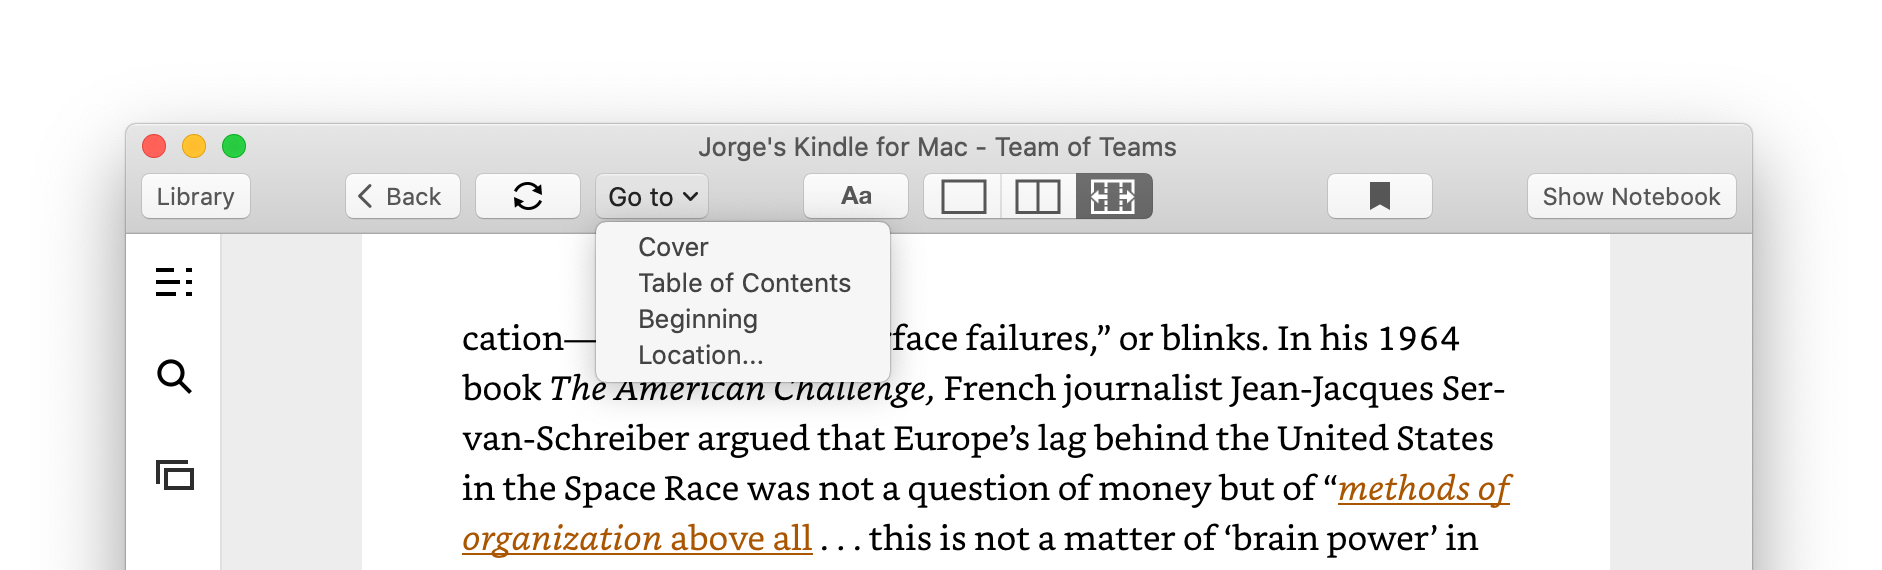 Navigation menus within a book in the Kindle app for macOS. Note the dedicated "Sync to Furthest Page Read" button next to the "Go to" menu.